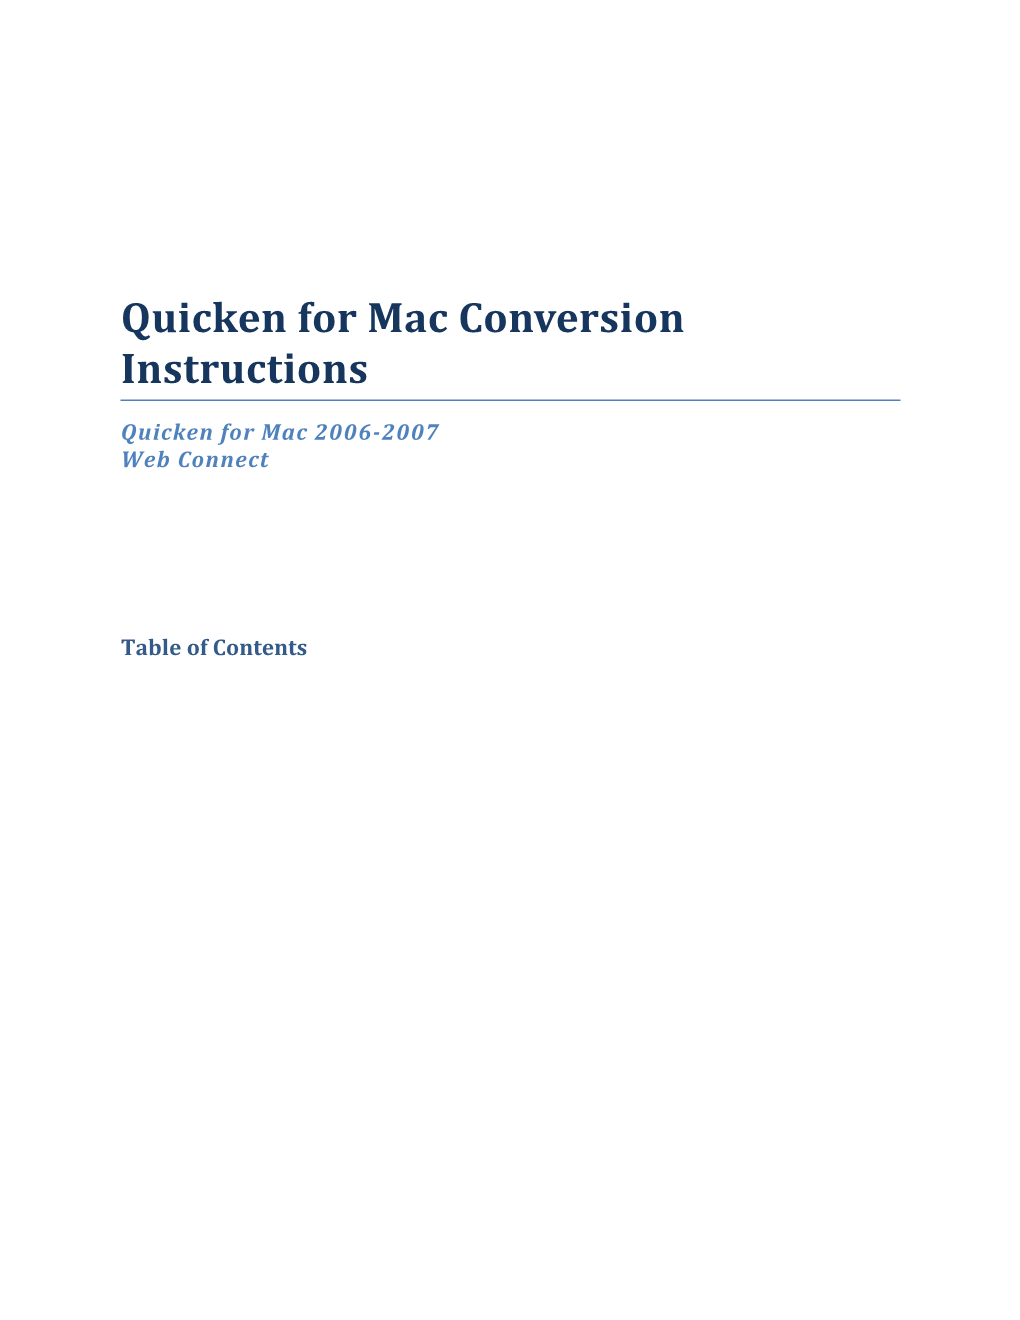 Quicken for Mac Conversion Instructions s3